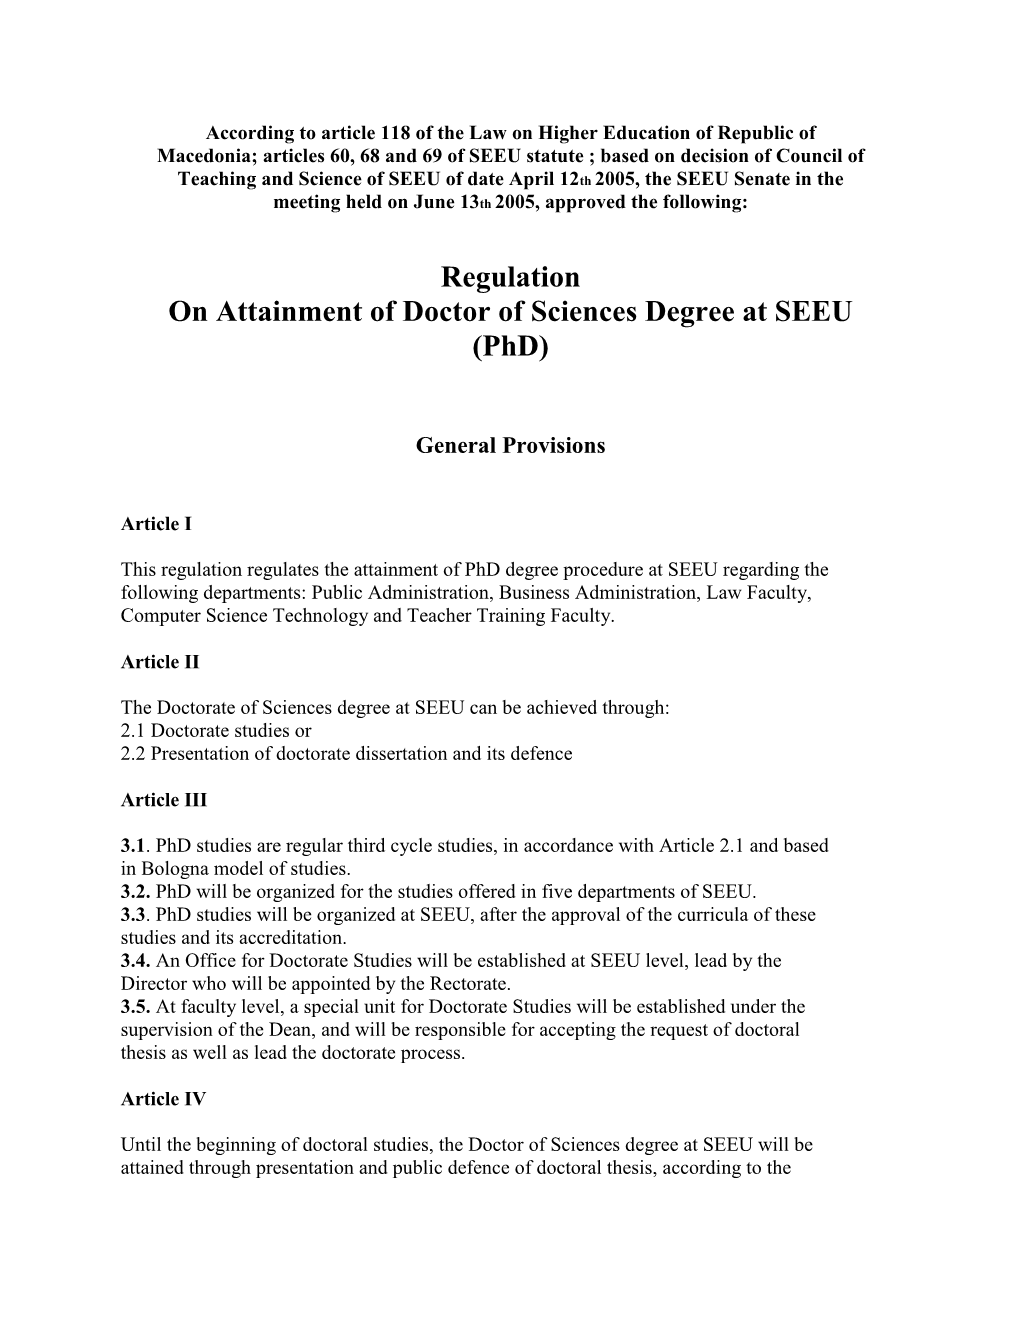 Regulation on Attainment of Doctor of Sciences Degree at SEEU (Phd)